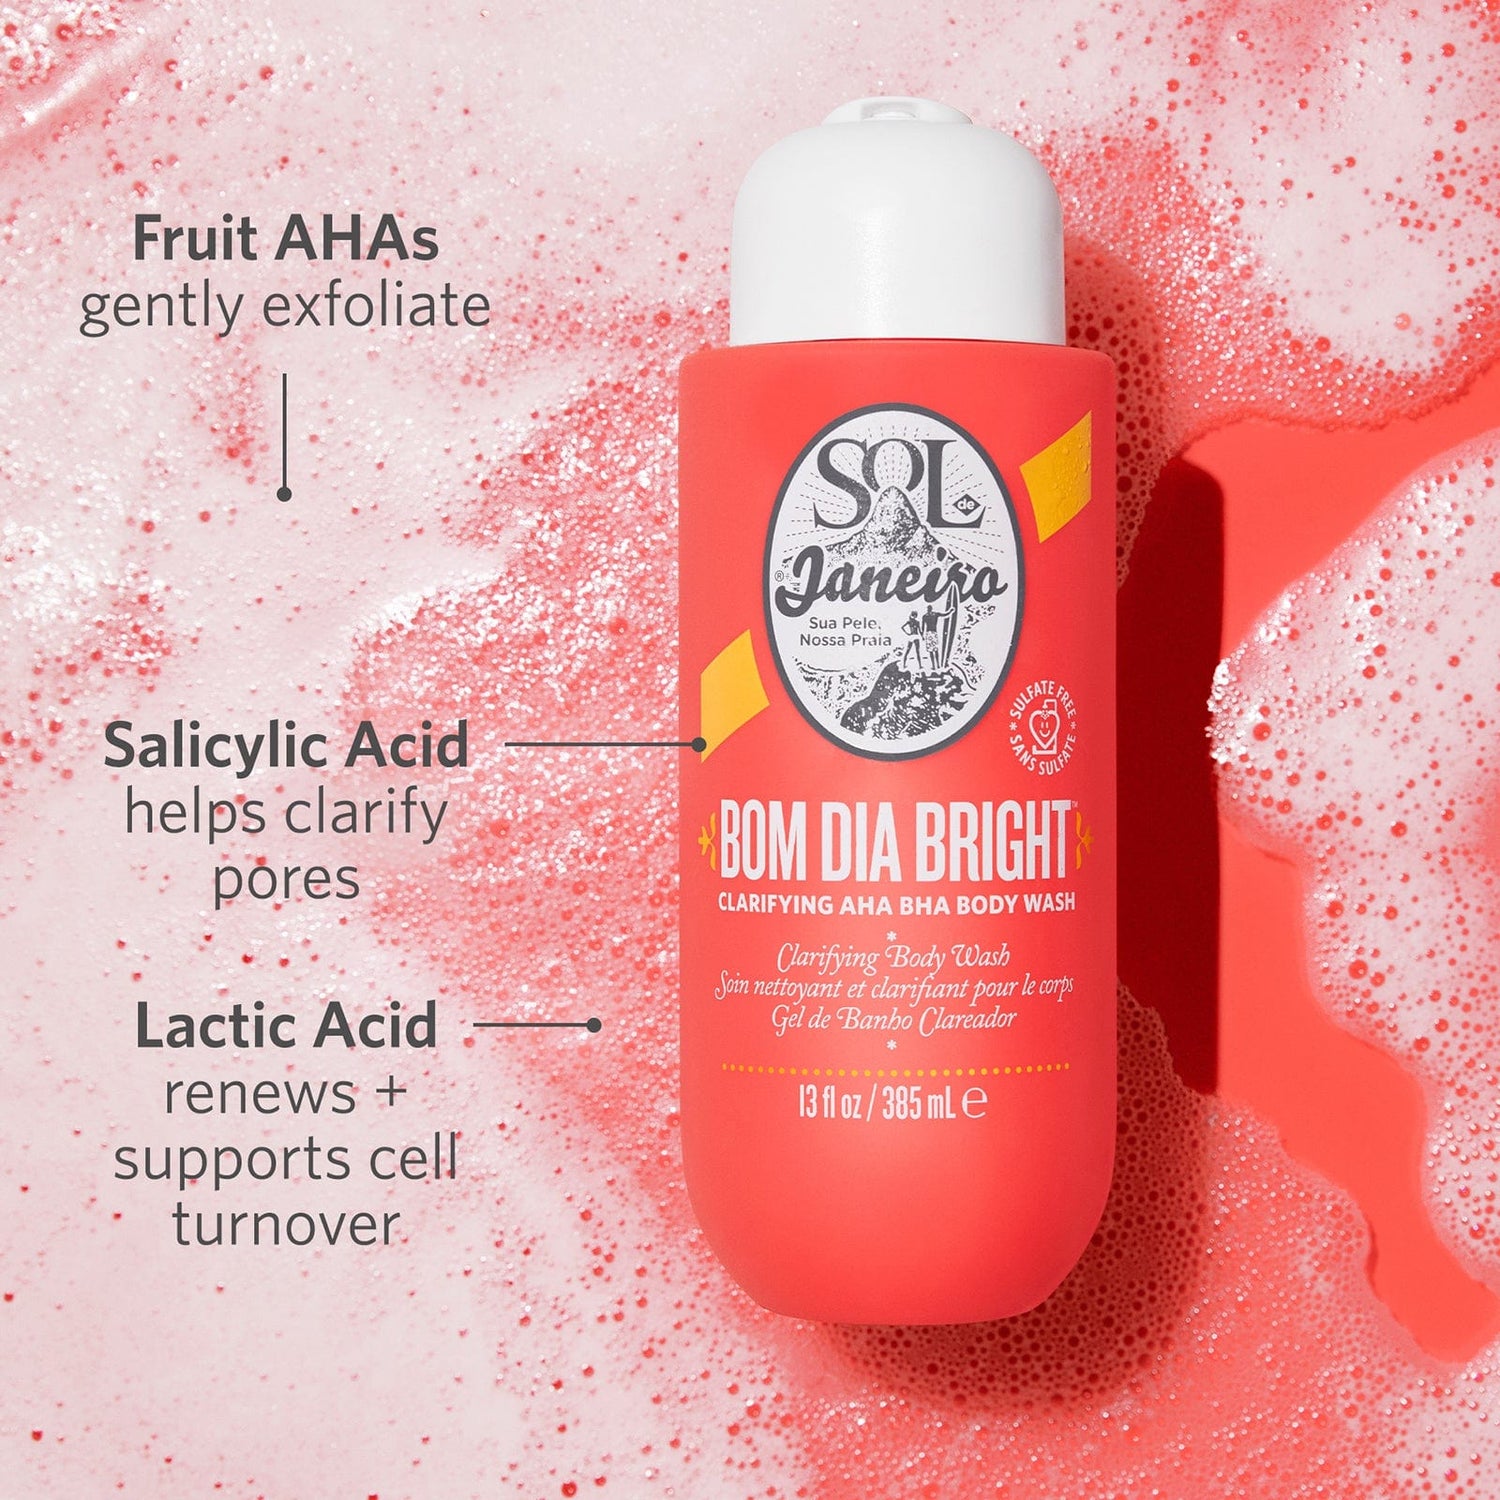 Fruit AHAs: gently exfoliate - Salicylic Acid: helps clarify pores - Lactic Acid: Renews + supports cell turnover